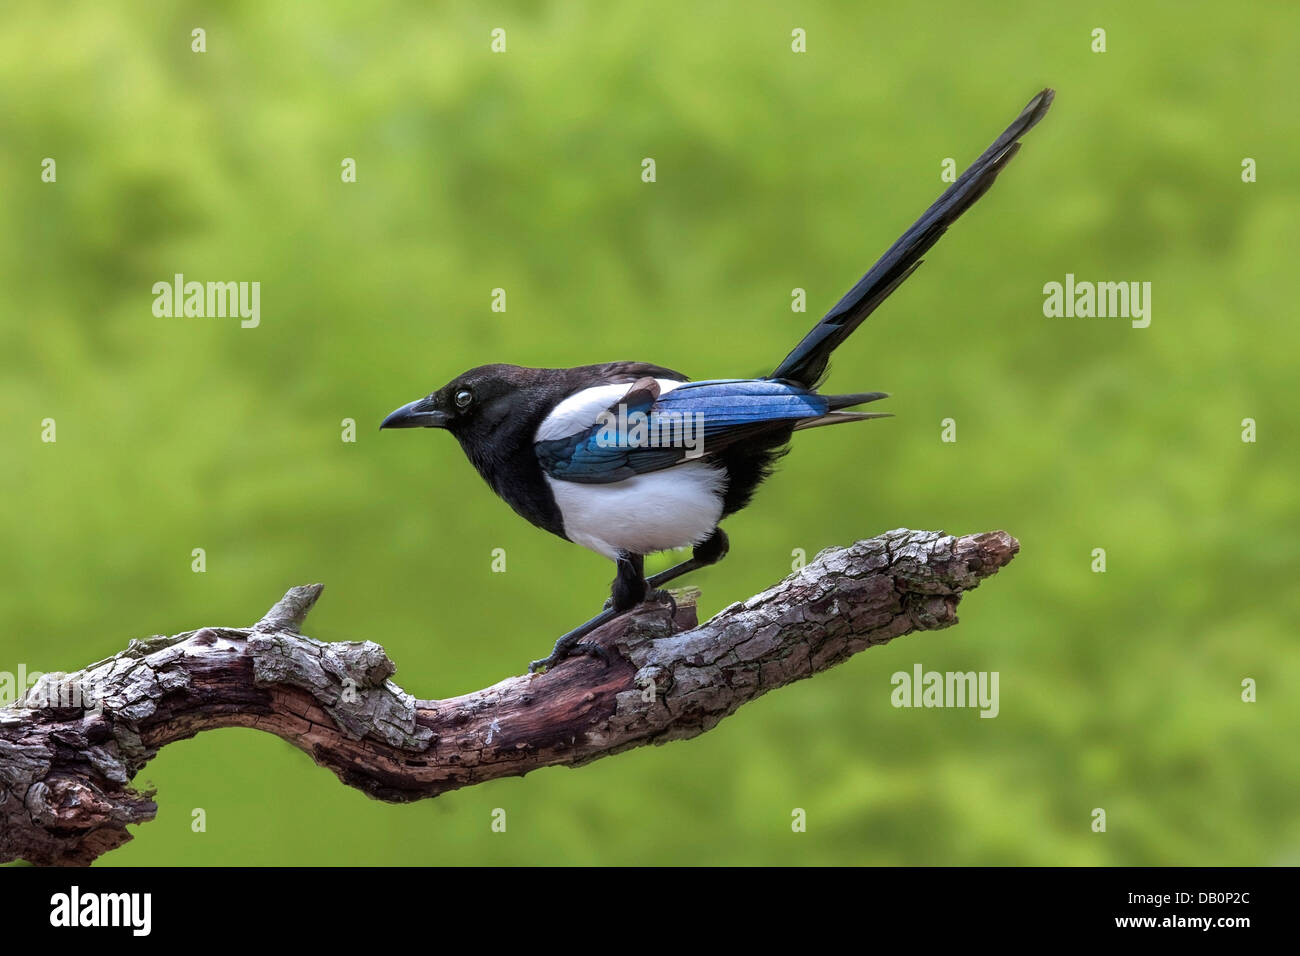 Eurasian Magpie / European Magpie / Common Magpie (Pica pica) perched on branch in tree Stock Photo